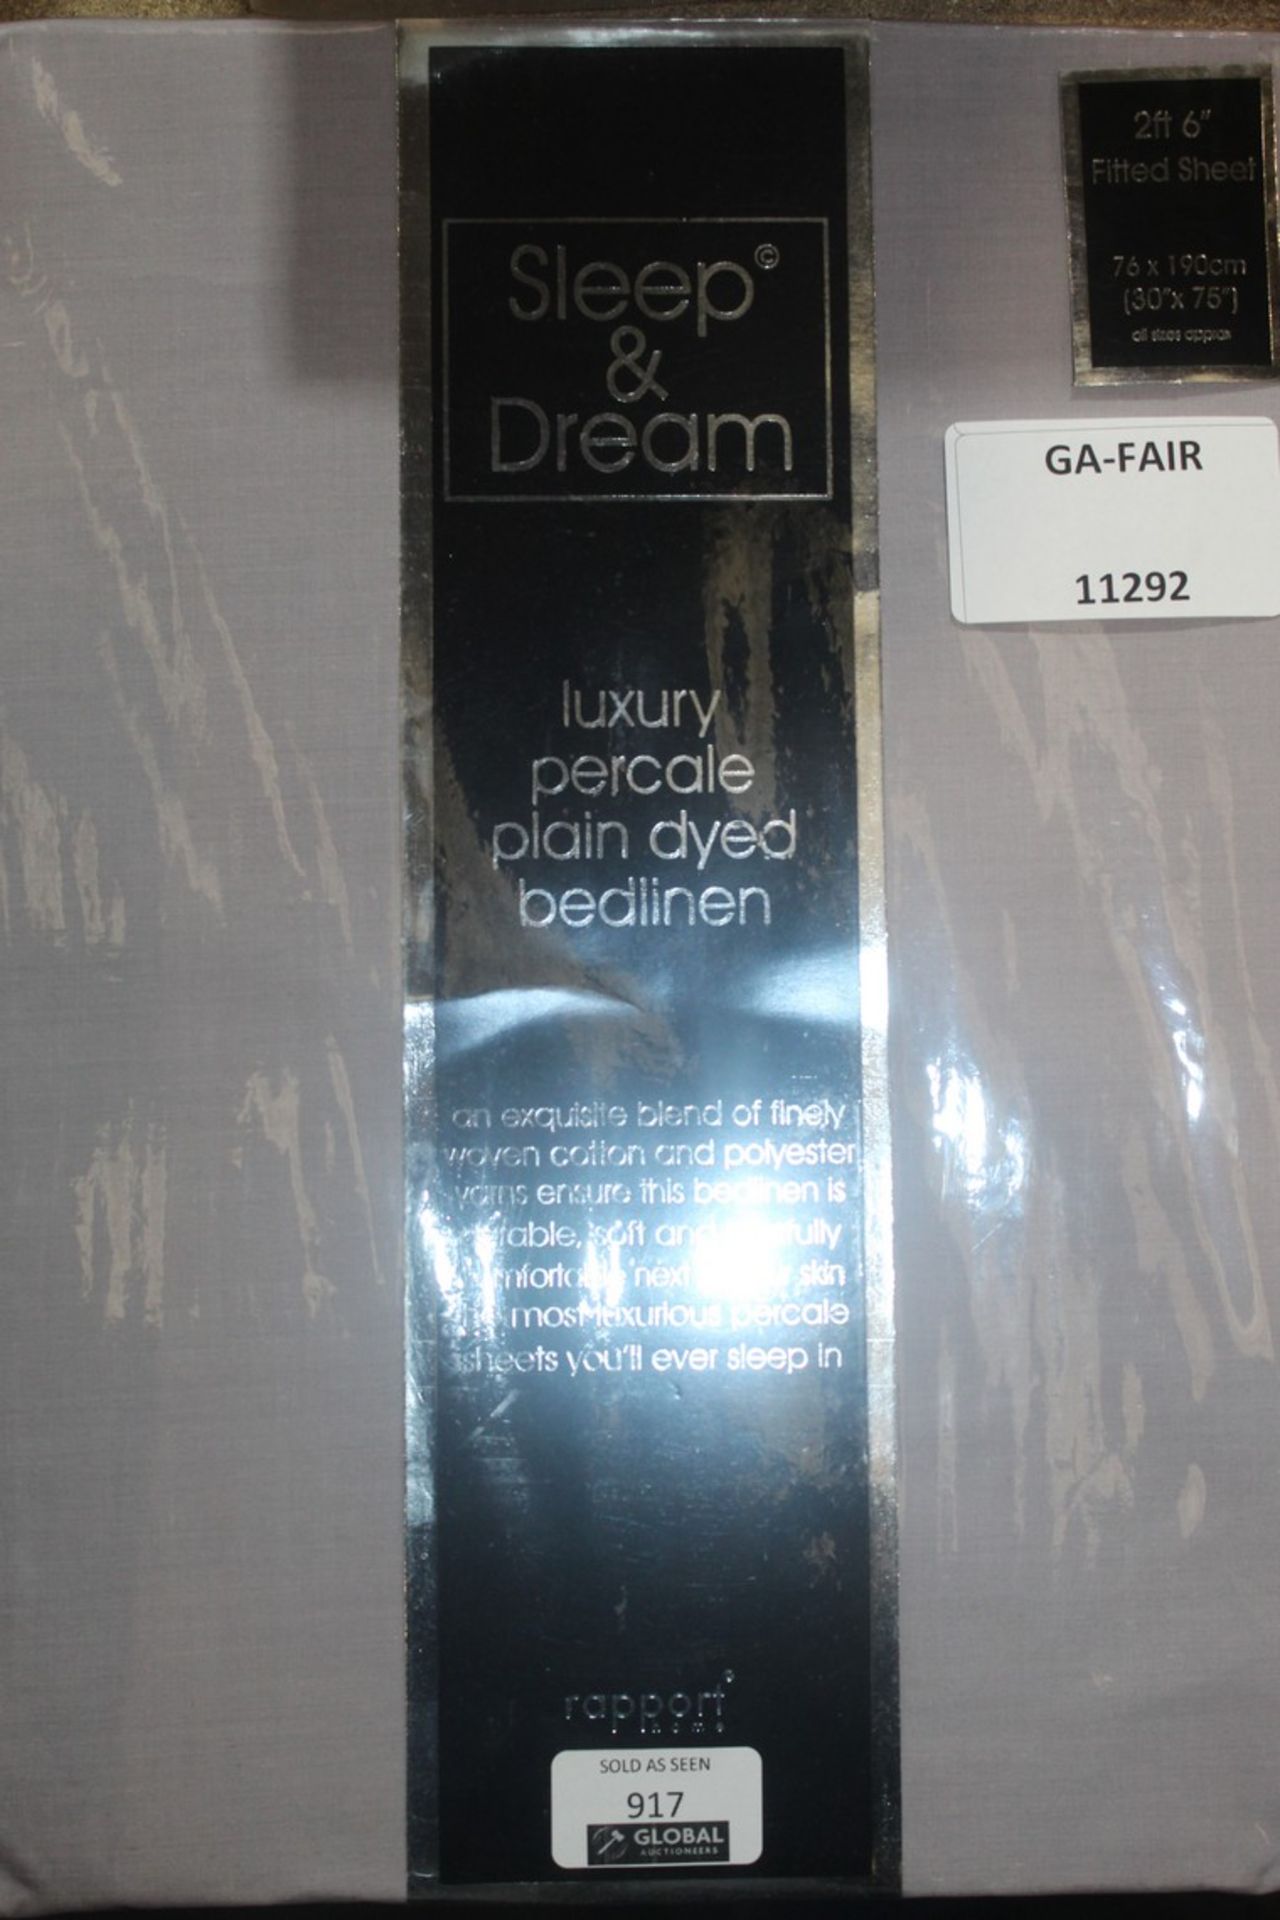 Sleep & Dream Luxury Plain Dyed Bed Linen RRP £30 Each (11292) (Pictures Are For Illustration